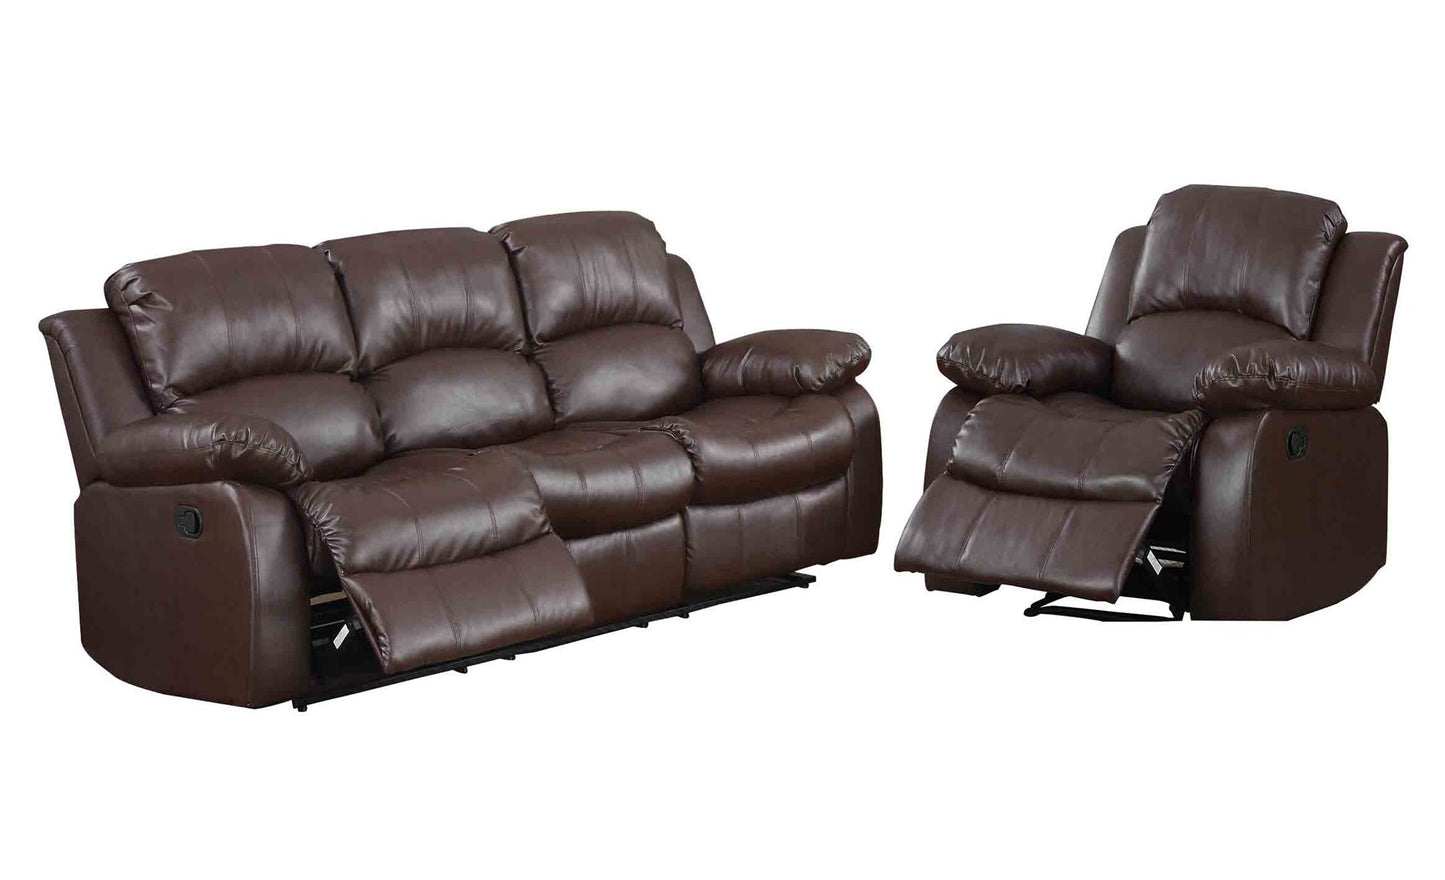 Homelegance Cranley 2PC Set Double Reclining Sofa & Recliner Chair in Leather - Brown